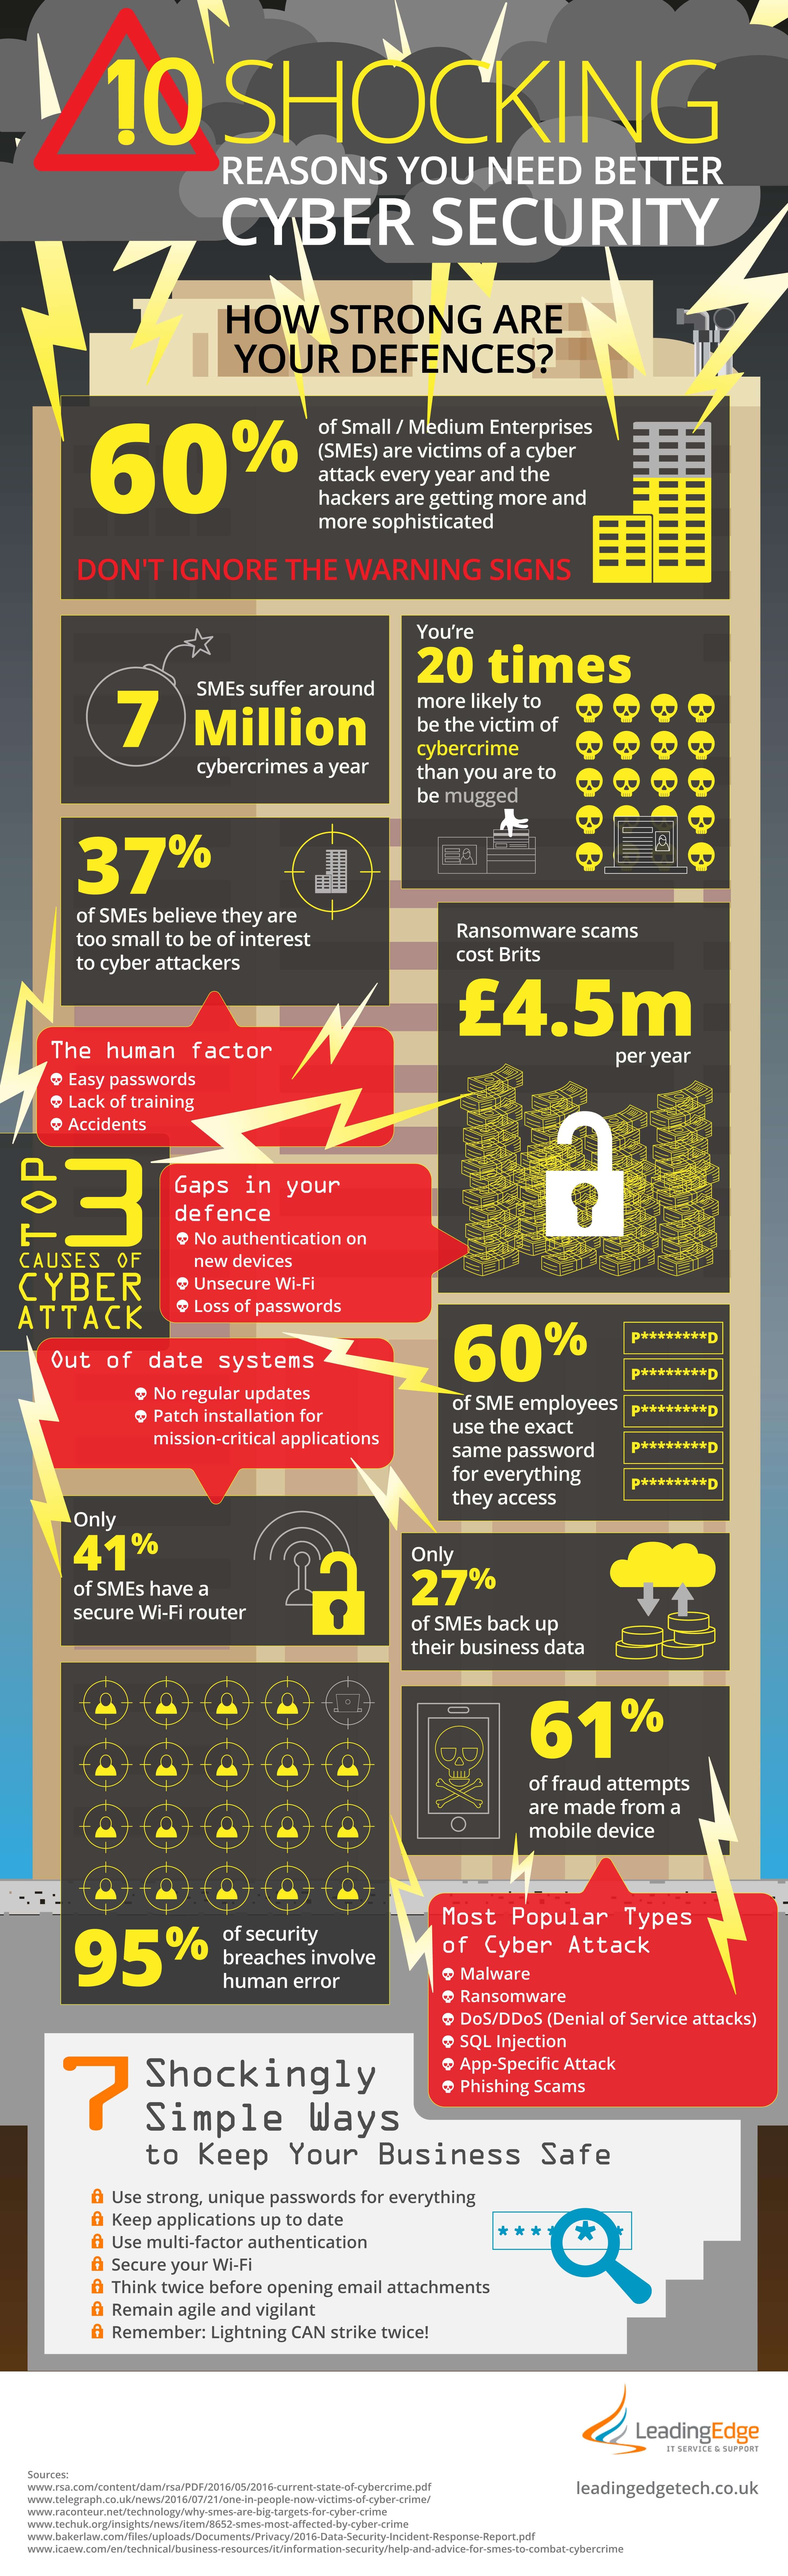 10 Shocking Reasons You Need Better Cyber Security